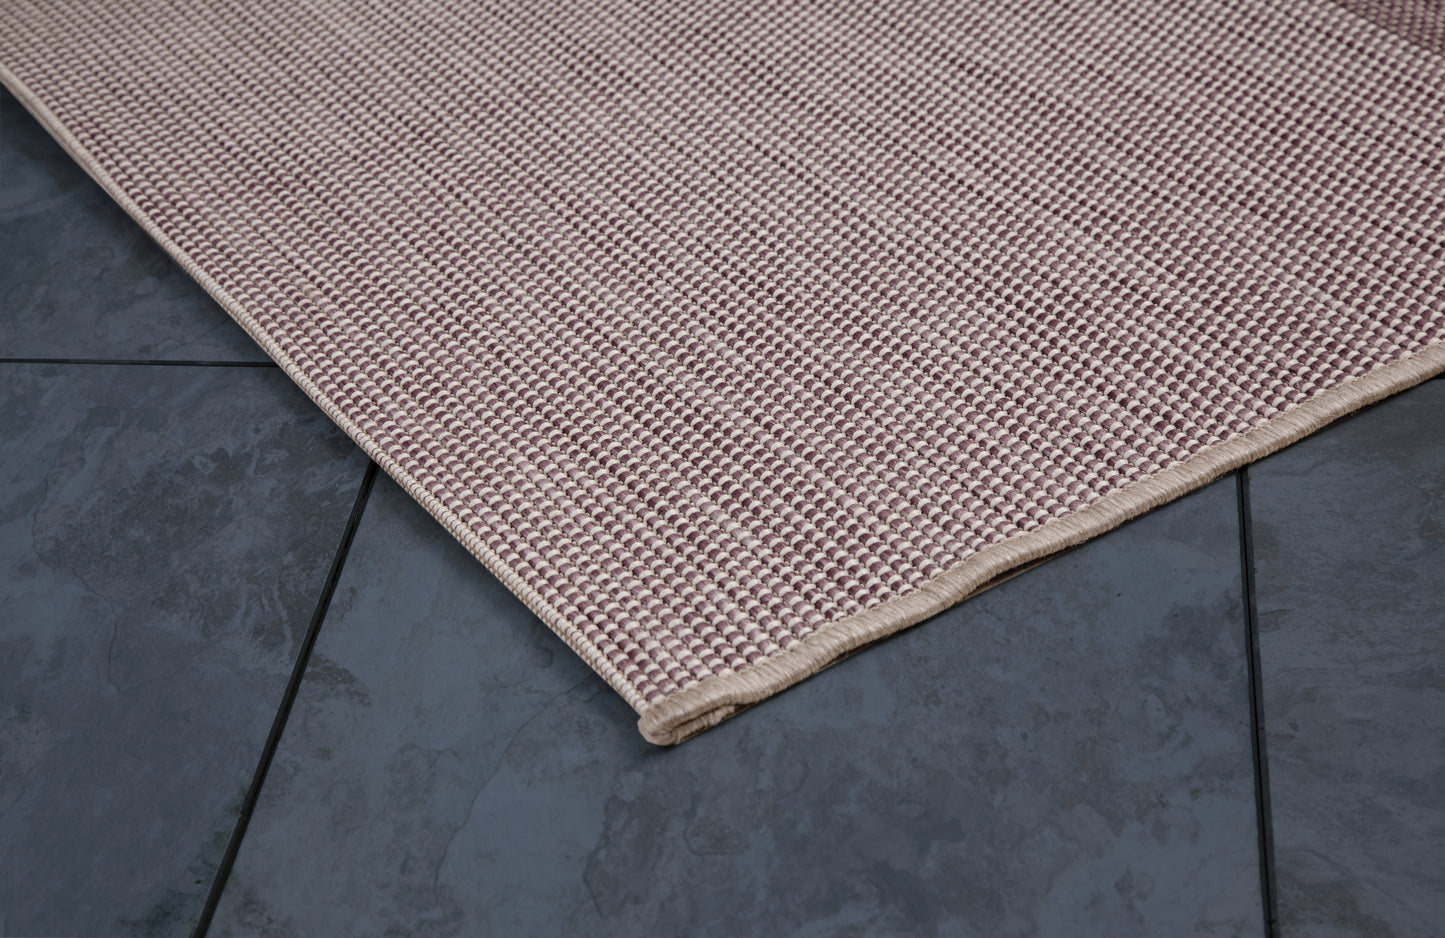 8X10 Area Rug, Striped White and Plum Indoor / Outdoor Polypropylene